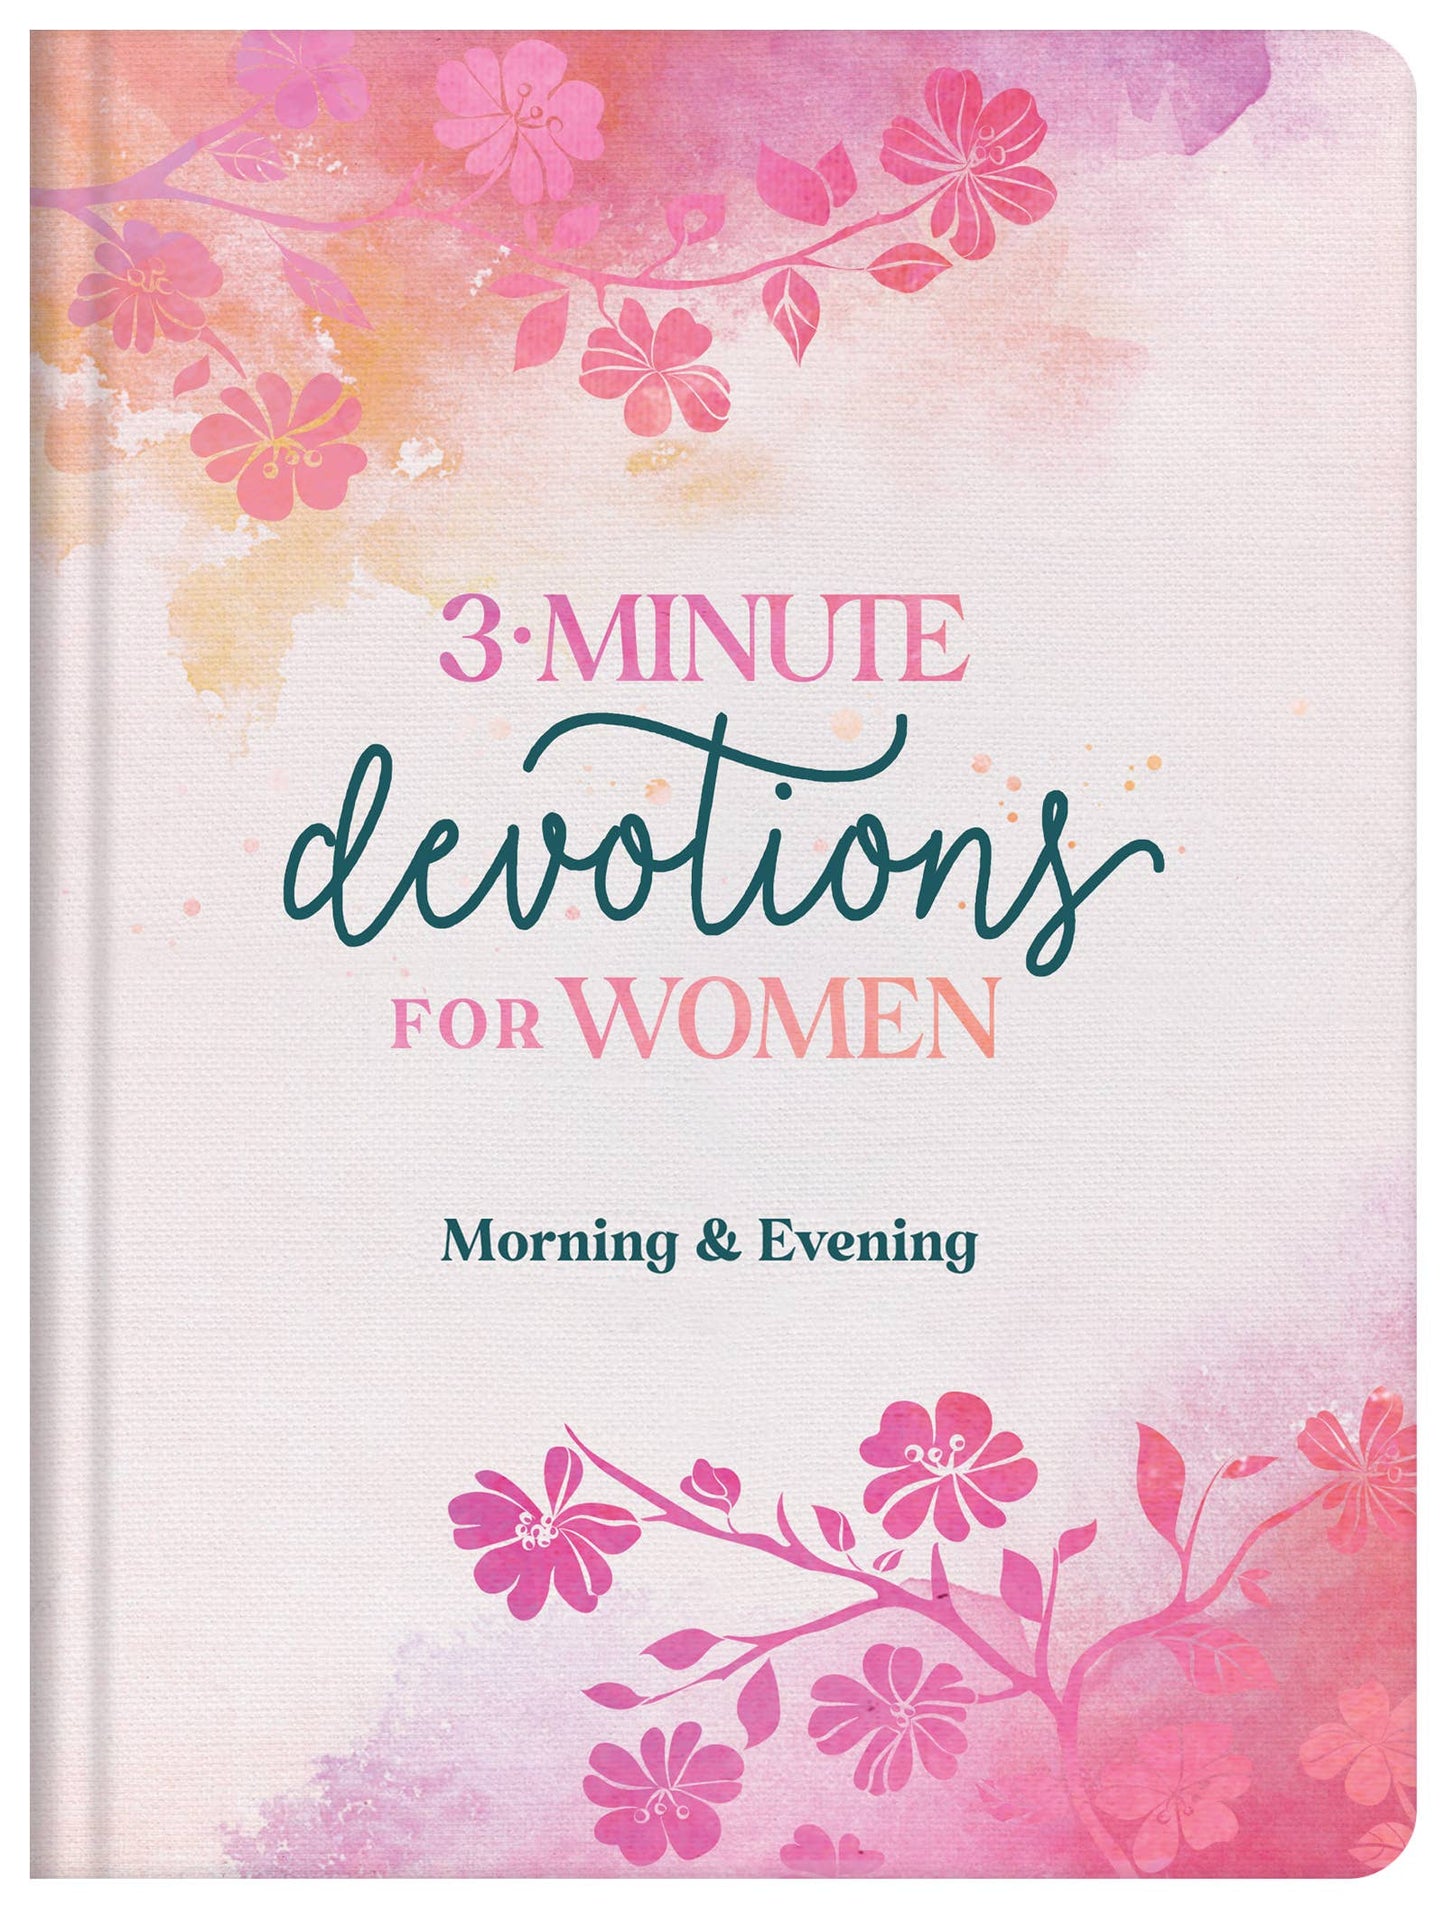 3-Minute Devotions for Women Morning and Evening Book